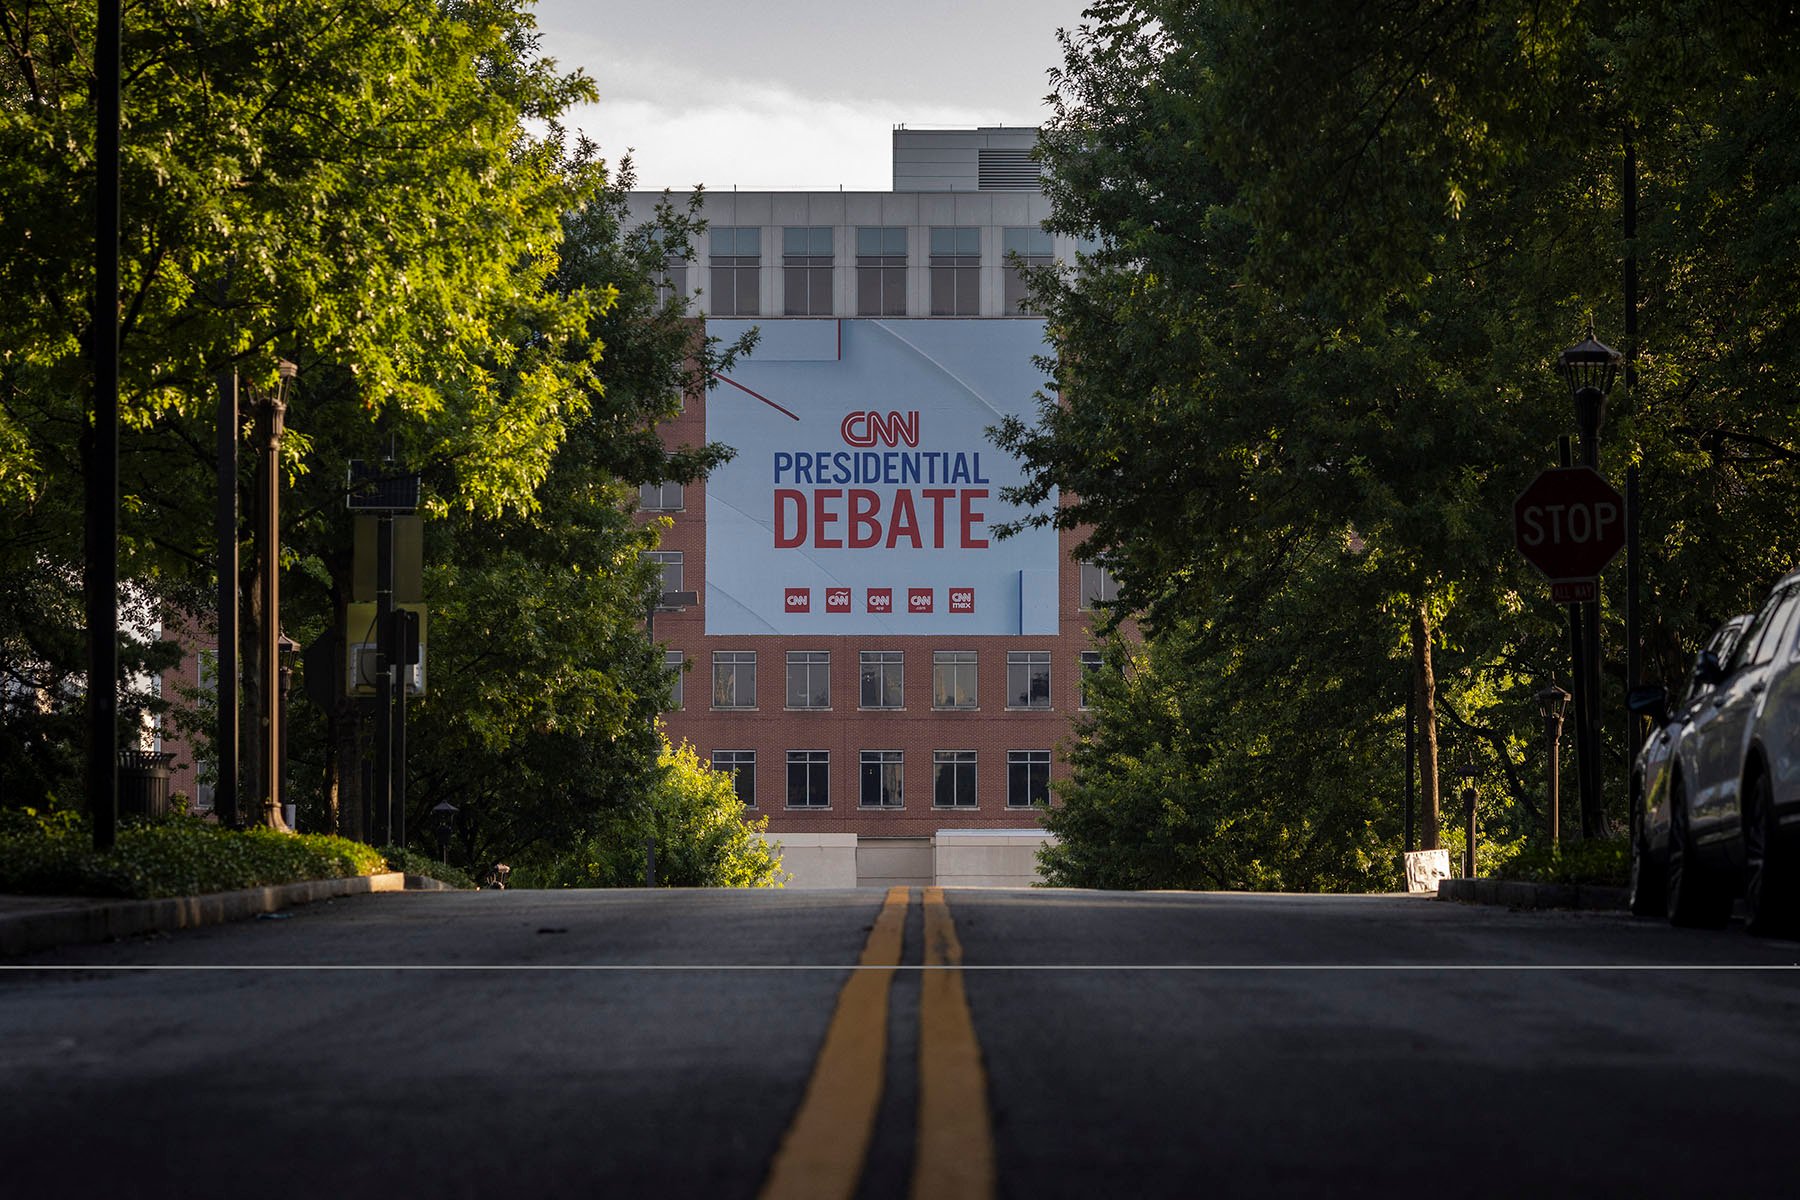 Banners are placed outside of CNN studios ahead of the first presidential debate in Atlanta, Georgia on June 24, 2024. The Banner reads "CNN Presidential Debate."